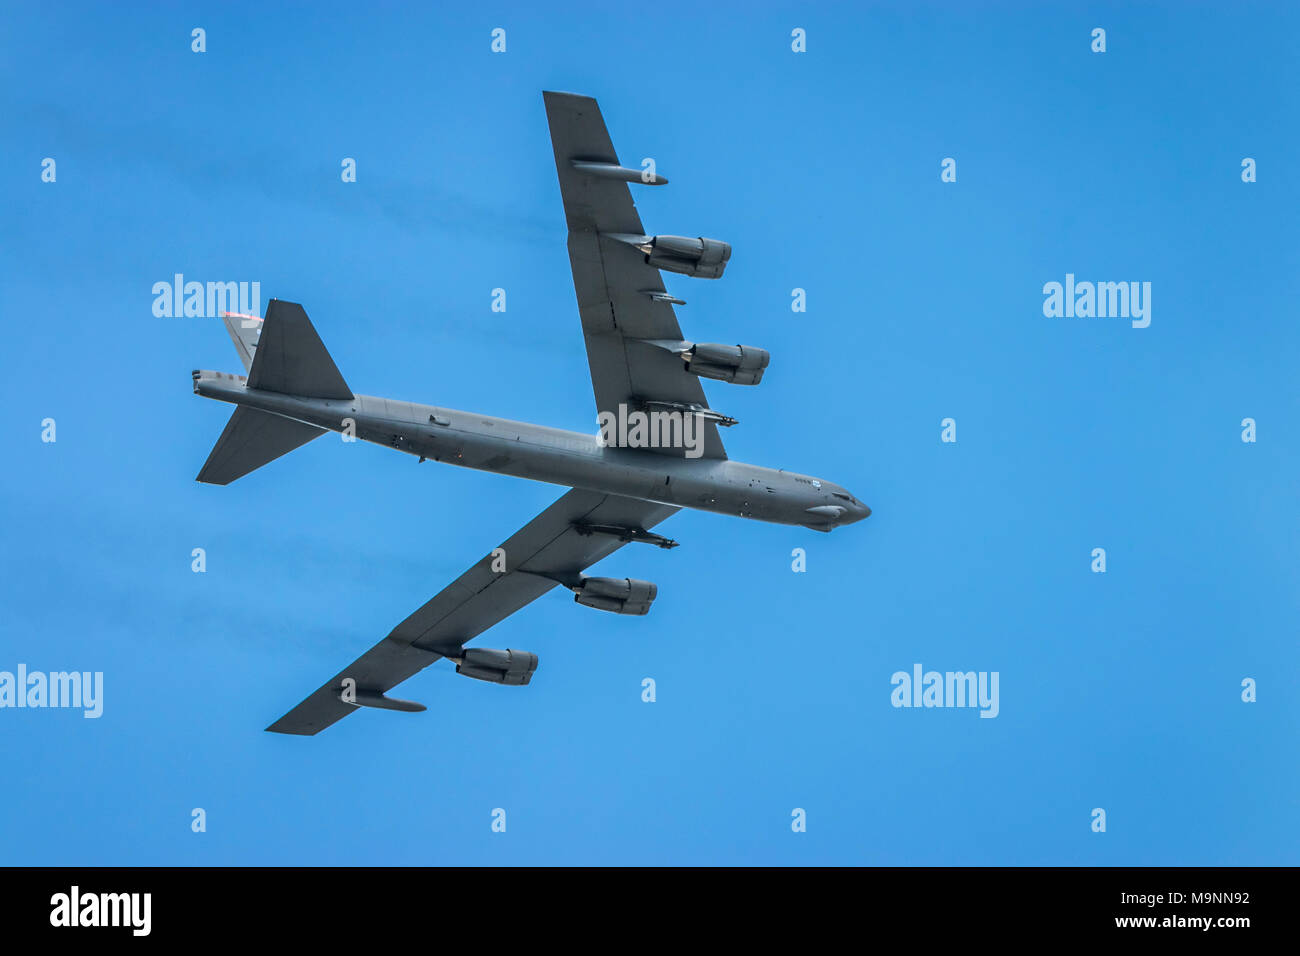 The Mighty Buff Boeing B 52 Stratofortress Bomber In Flight At The 17 Airshow In Duluth Minnesota Usa Stock Photo Alamy